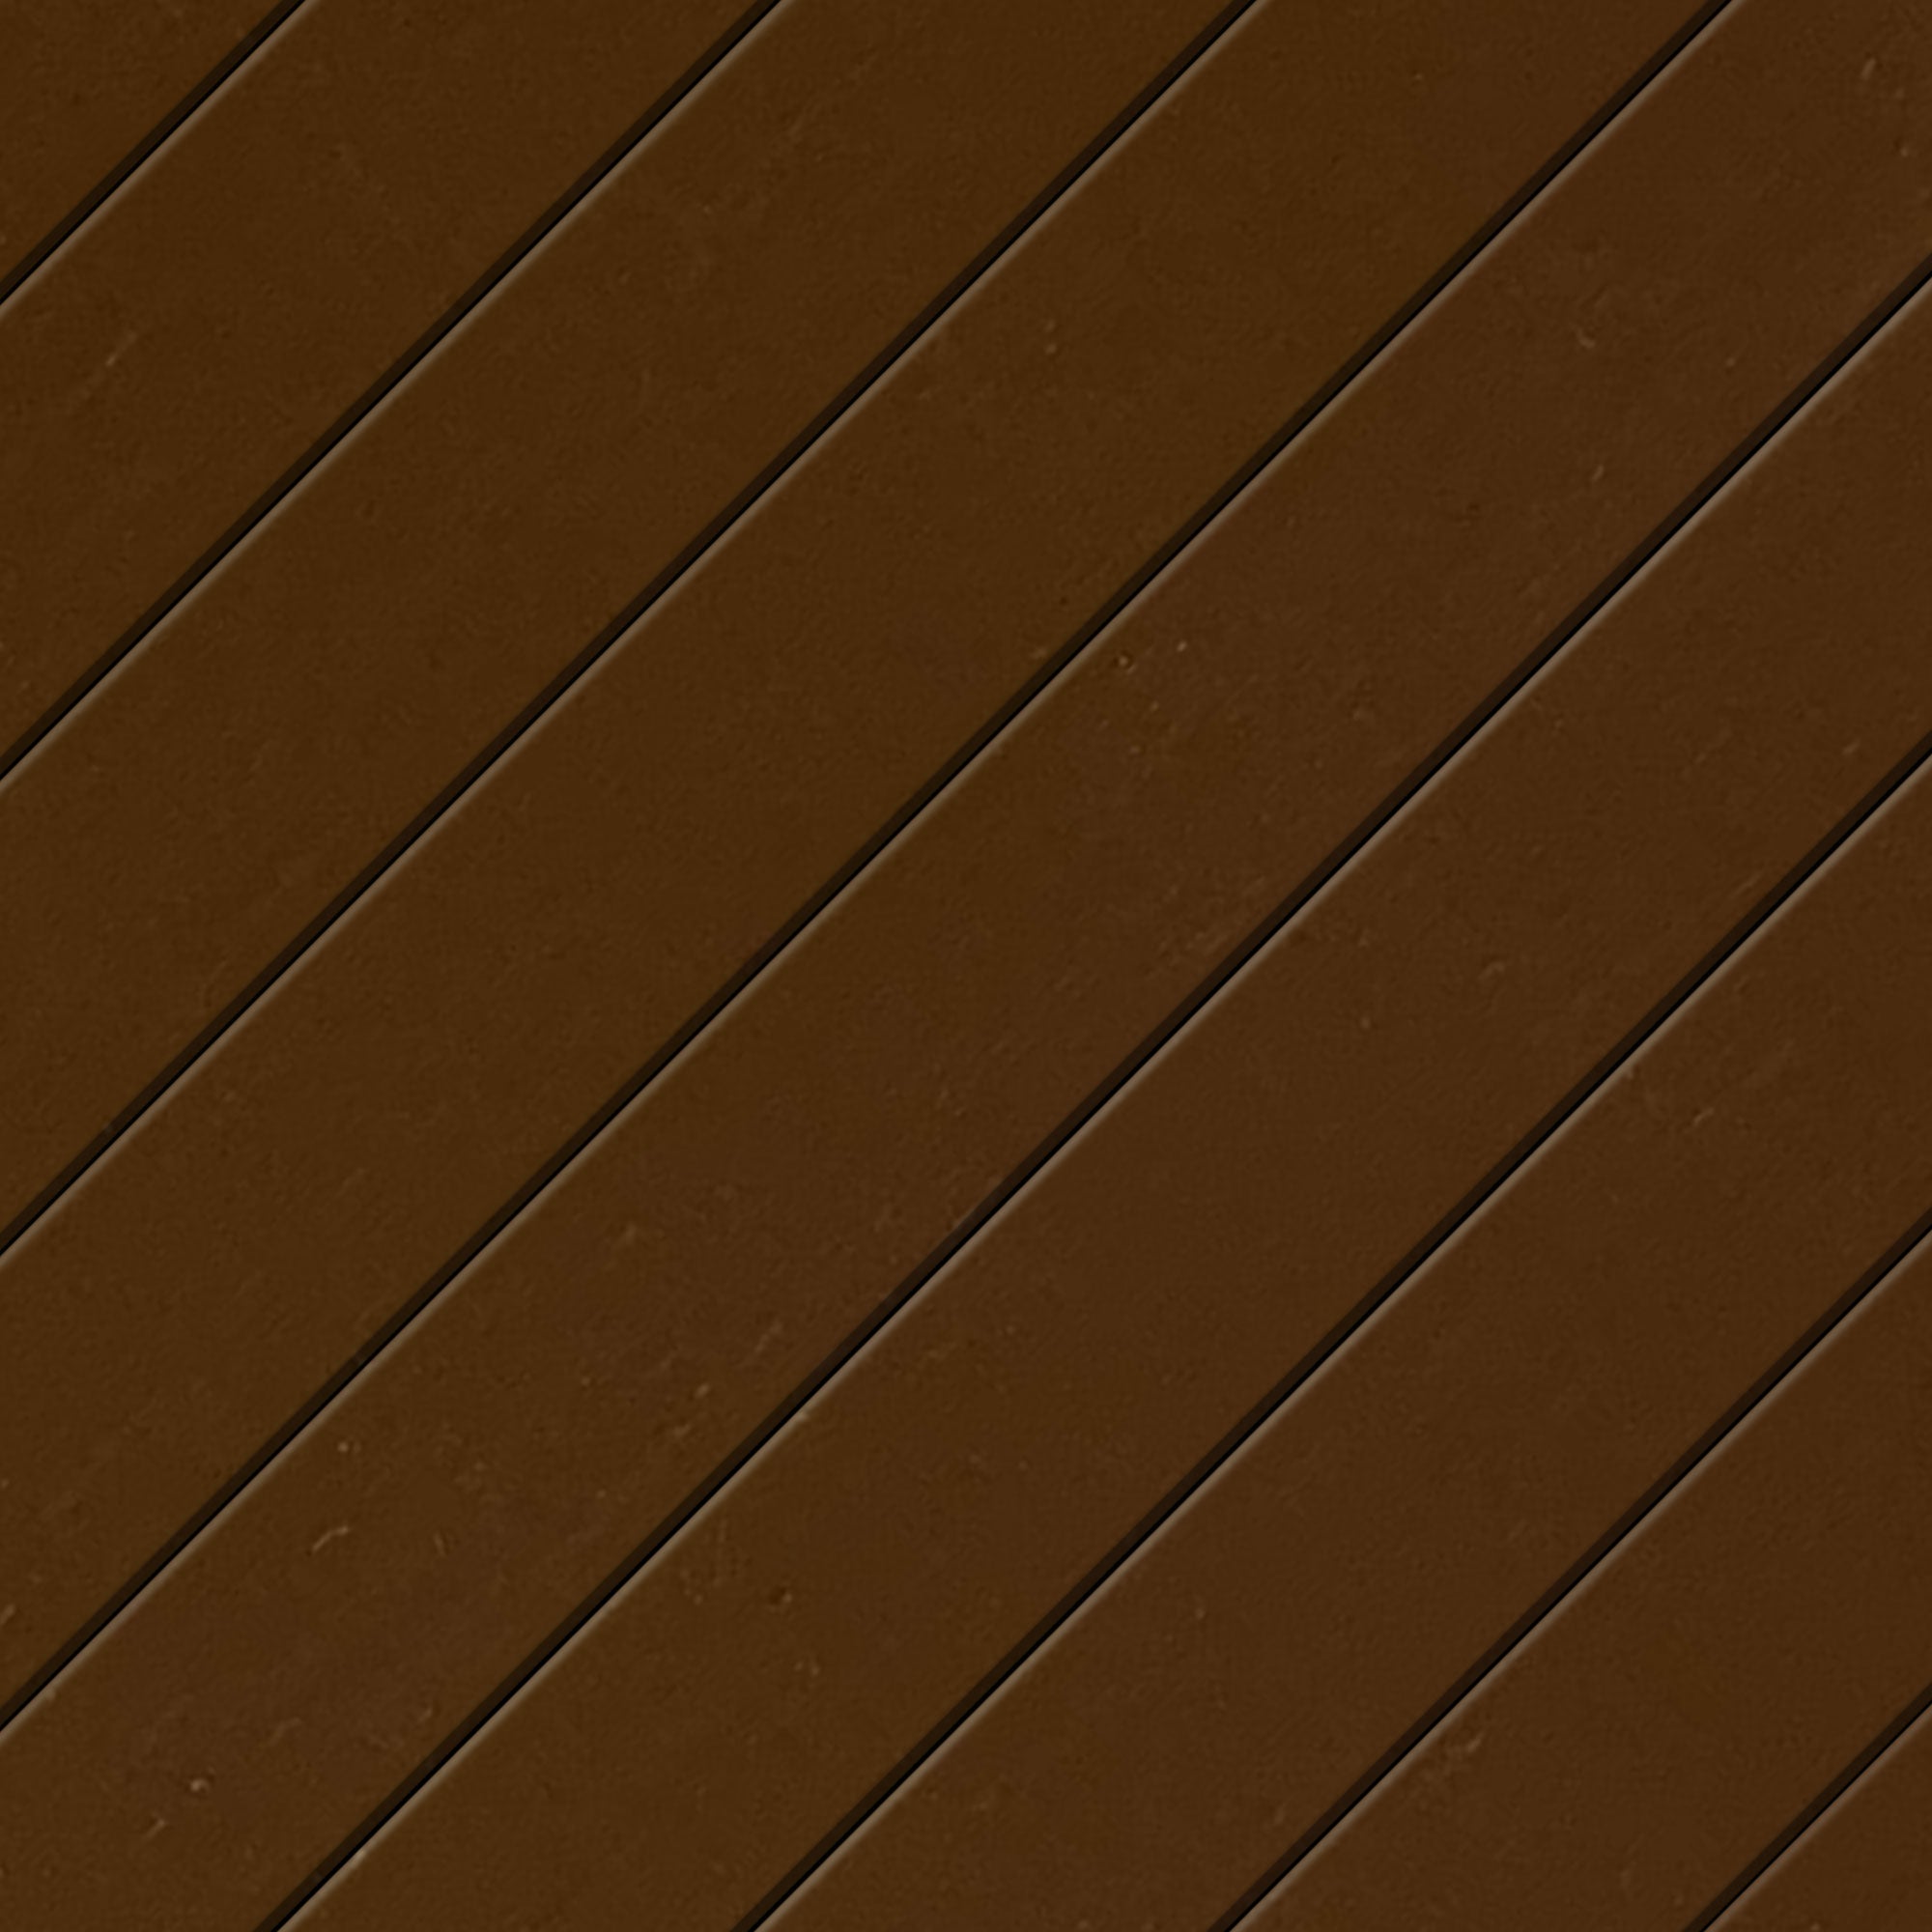 DEFY Solid Color Wood Stain